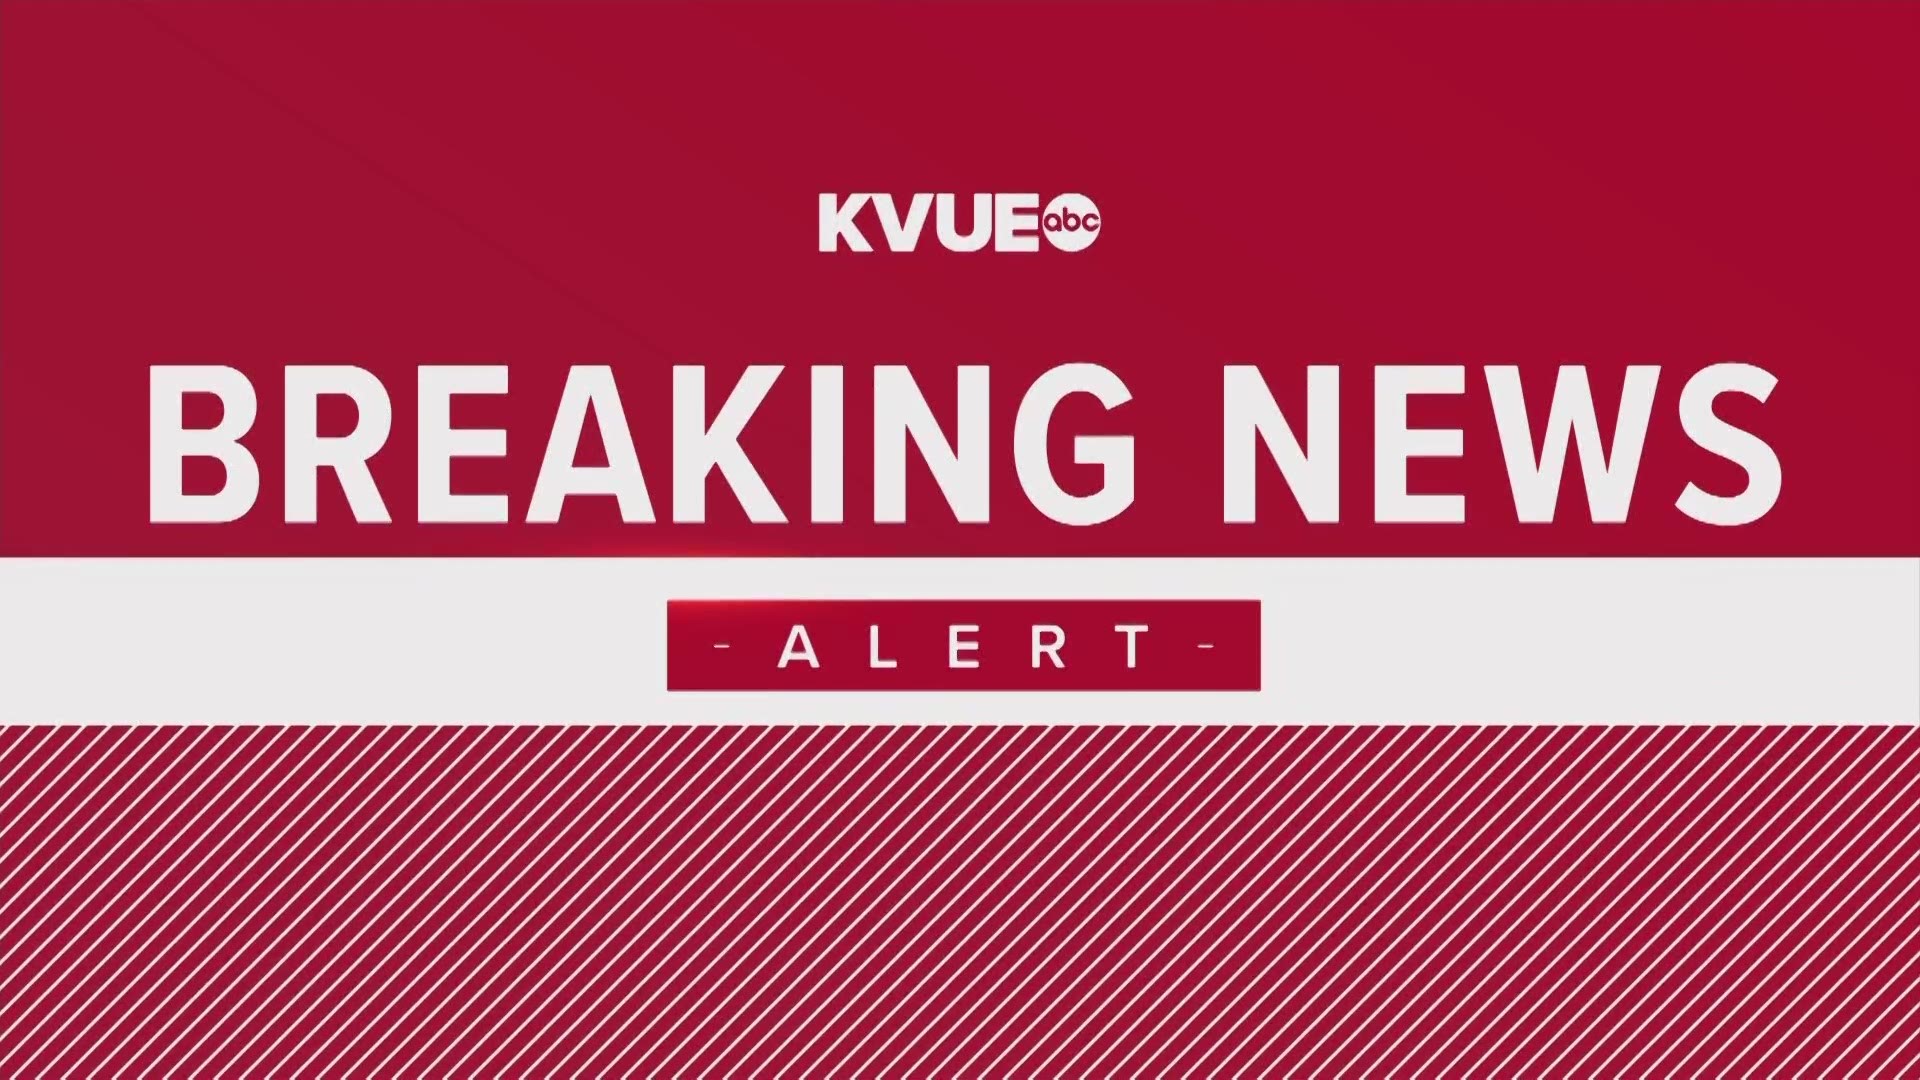 The Austin Police Department has confirmed that two people are dead following a reported hostage situation near MoPac Expressway that lasted about six hours.